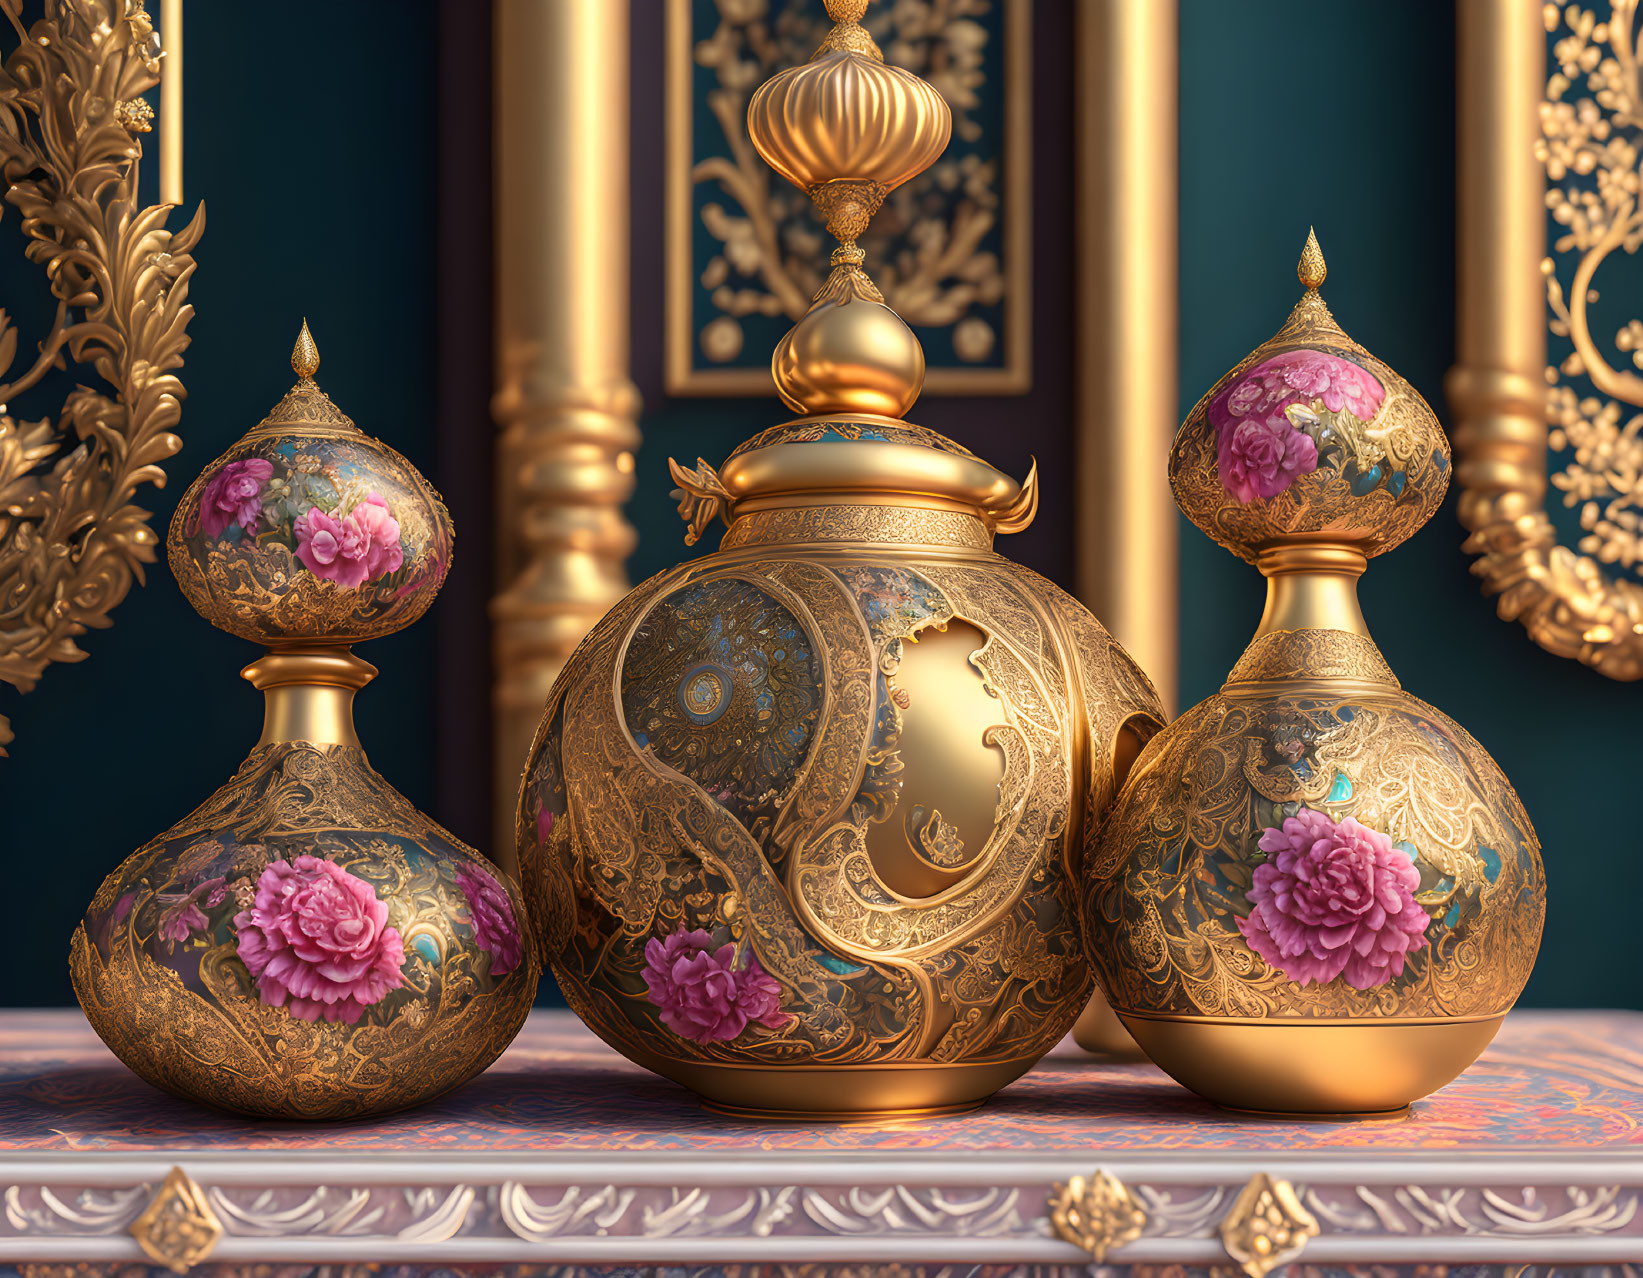 Ornate golden vases with intricate floral patterns and designs on luxurious gold and teal backdrop